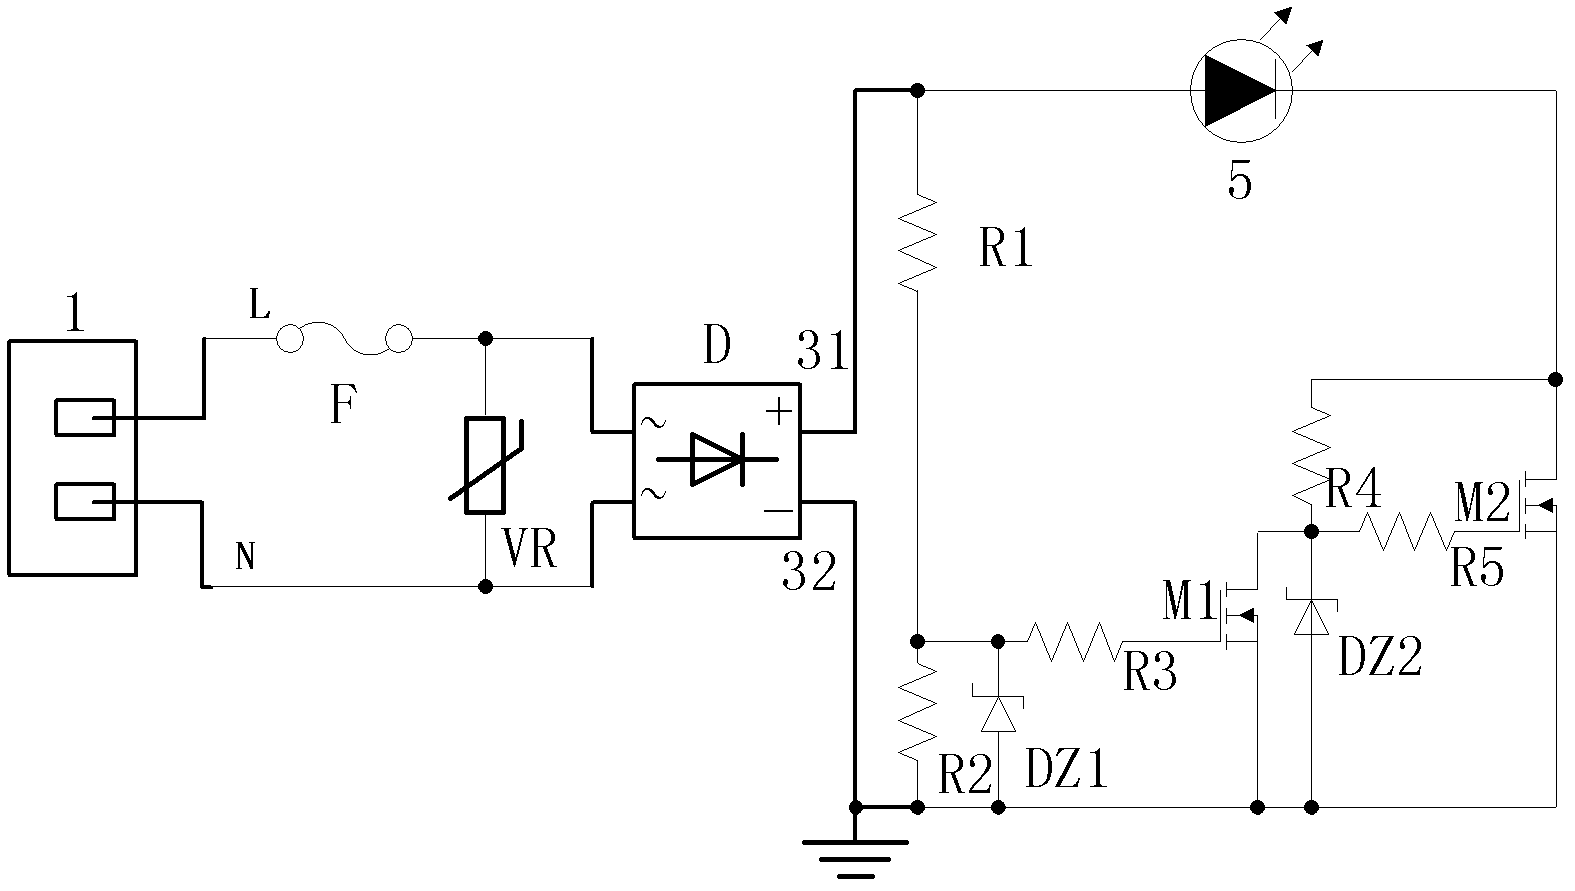 White-light light emitting diode (LED) light-emitting device directly driven by alternating current